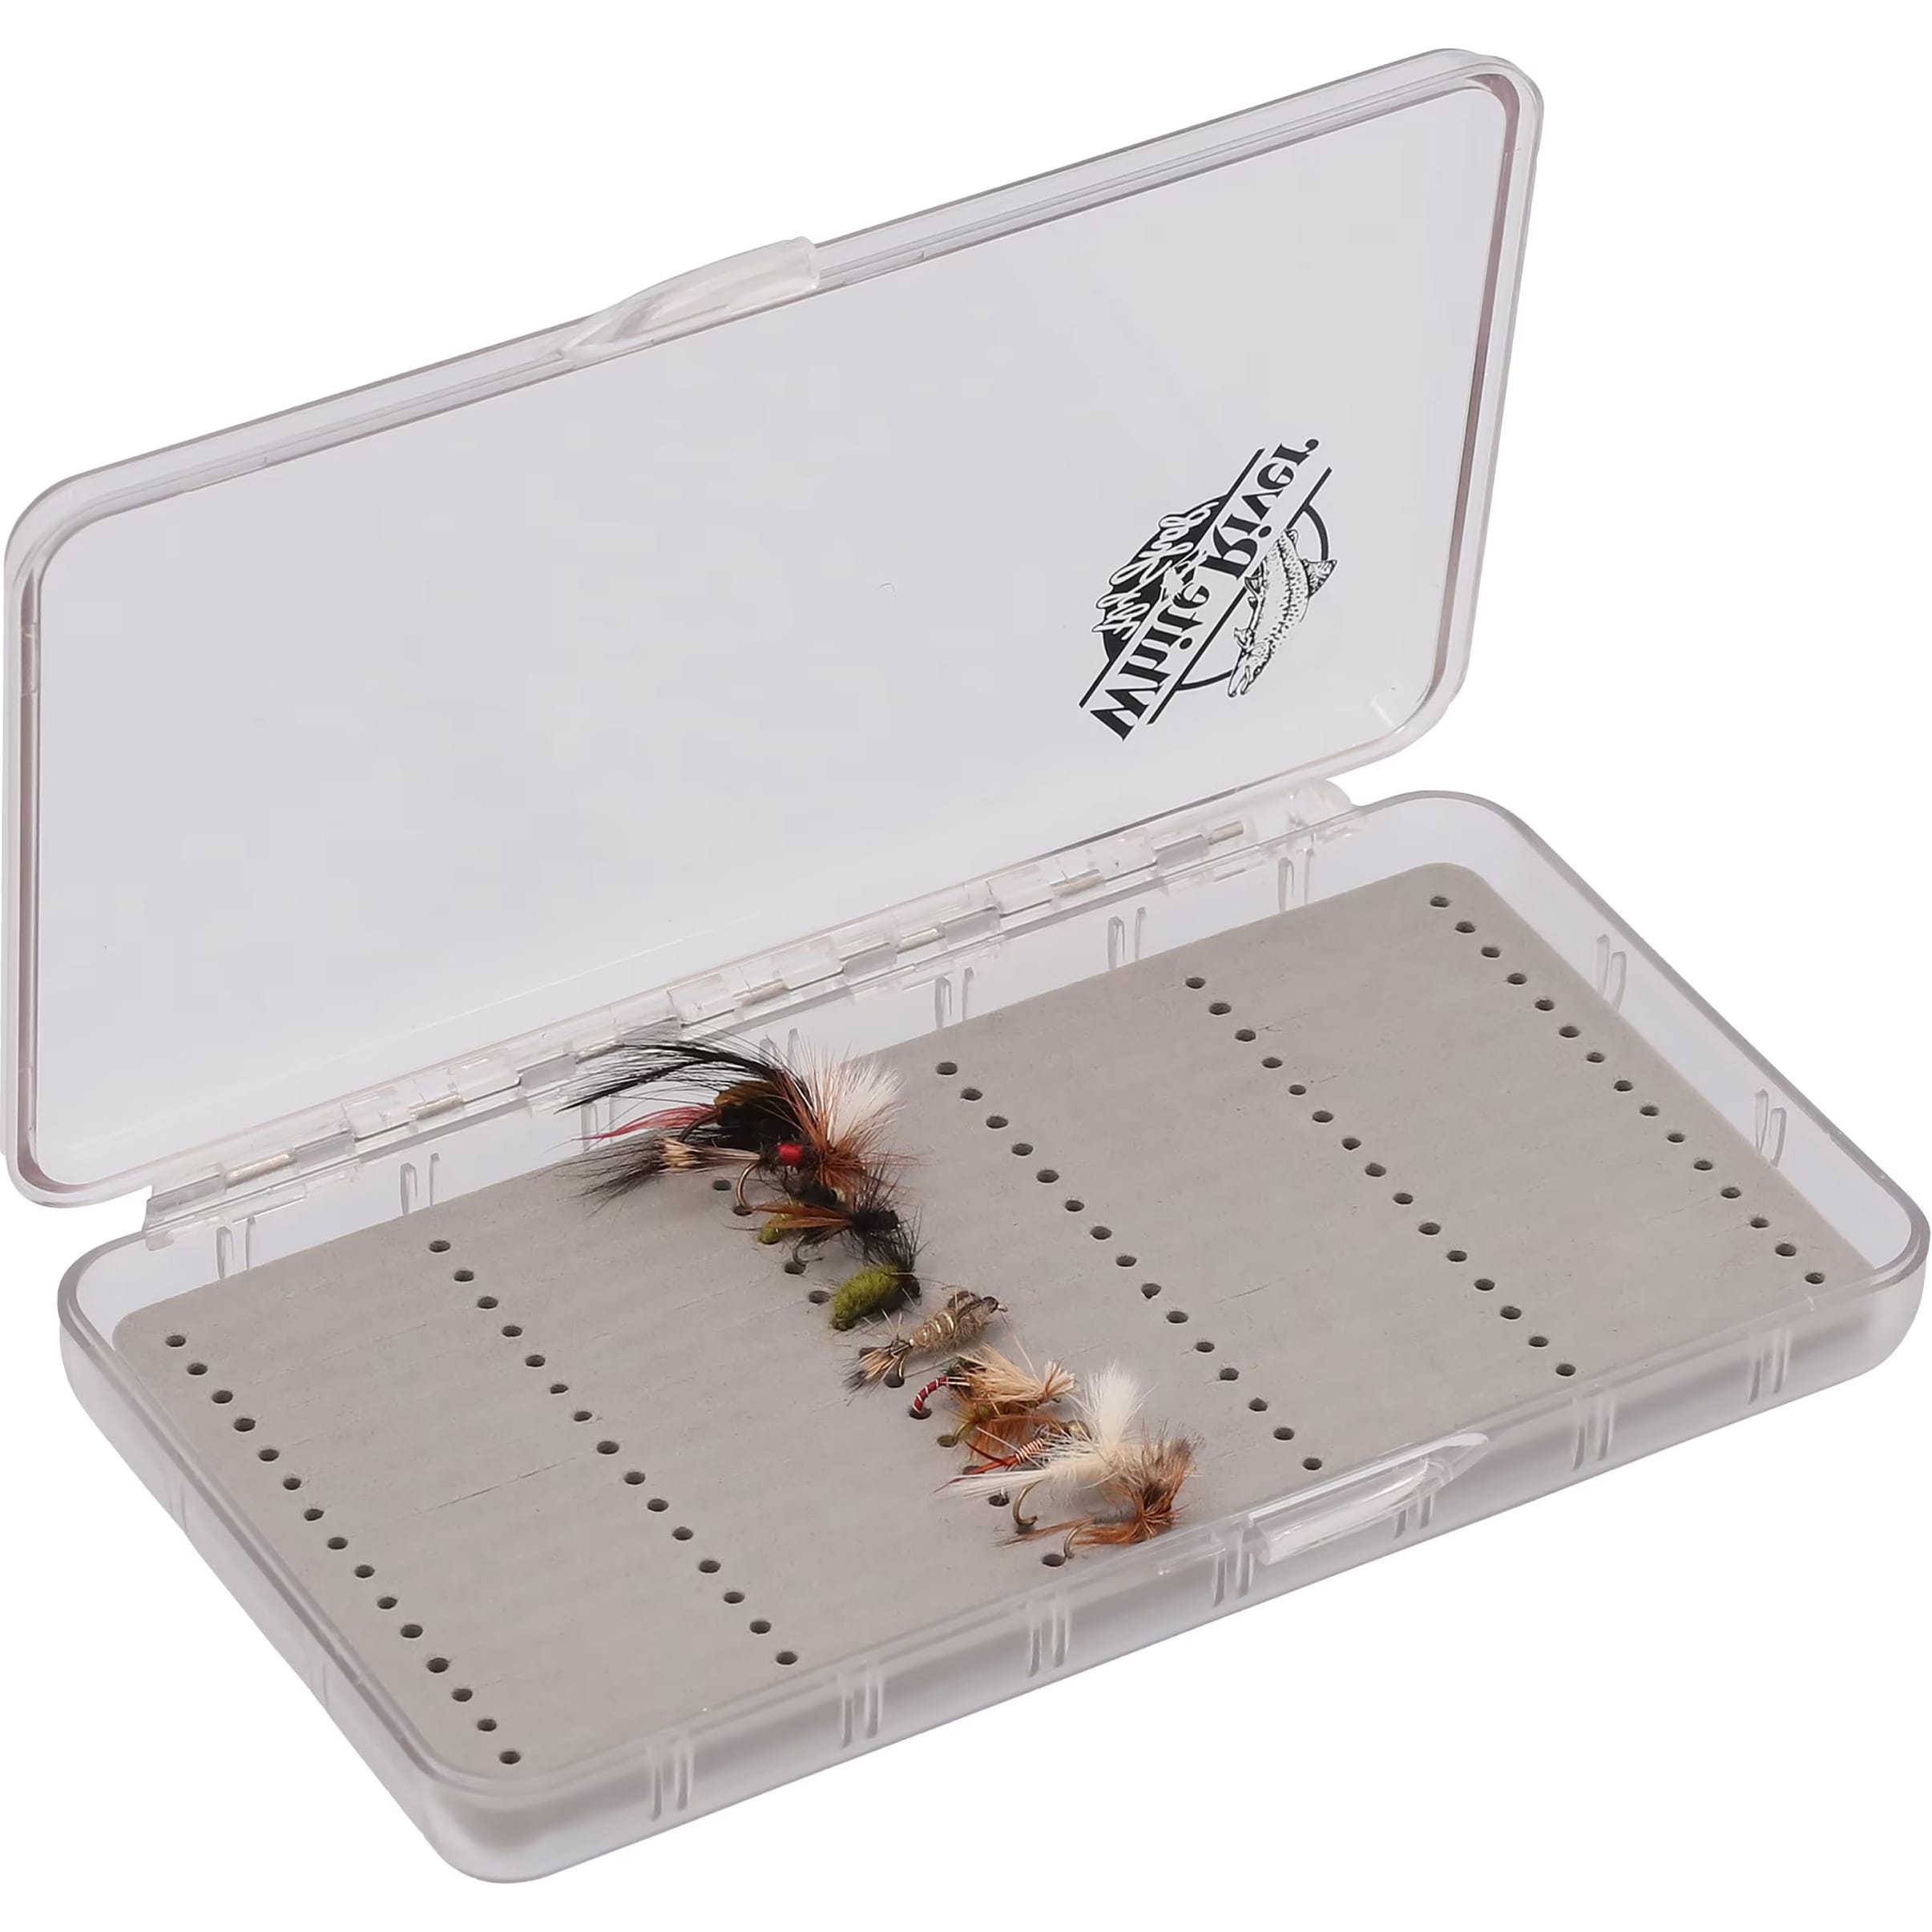 price comparison Orvis Okuma Flyfishing Cabelas Tackle Box 6 Fly boxes. Fly  Fishing Book,flies